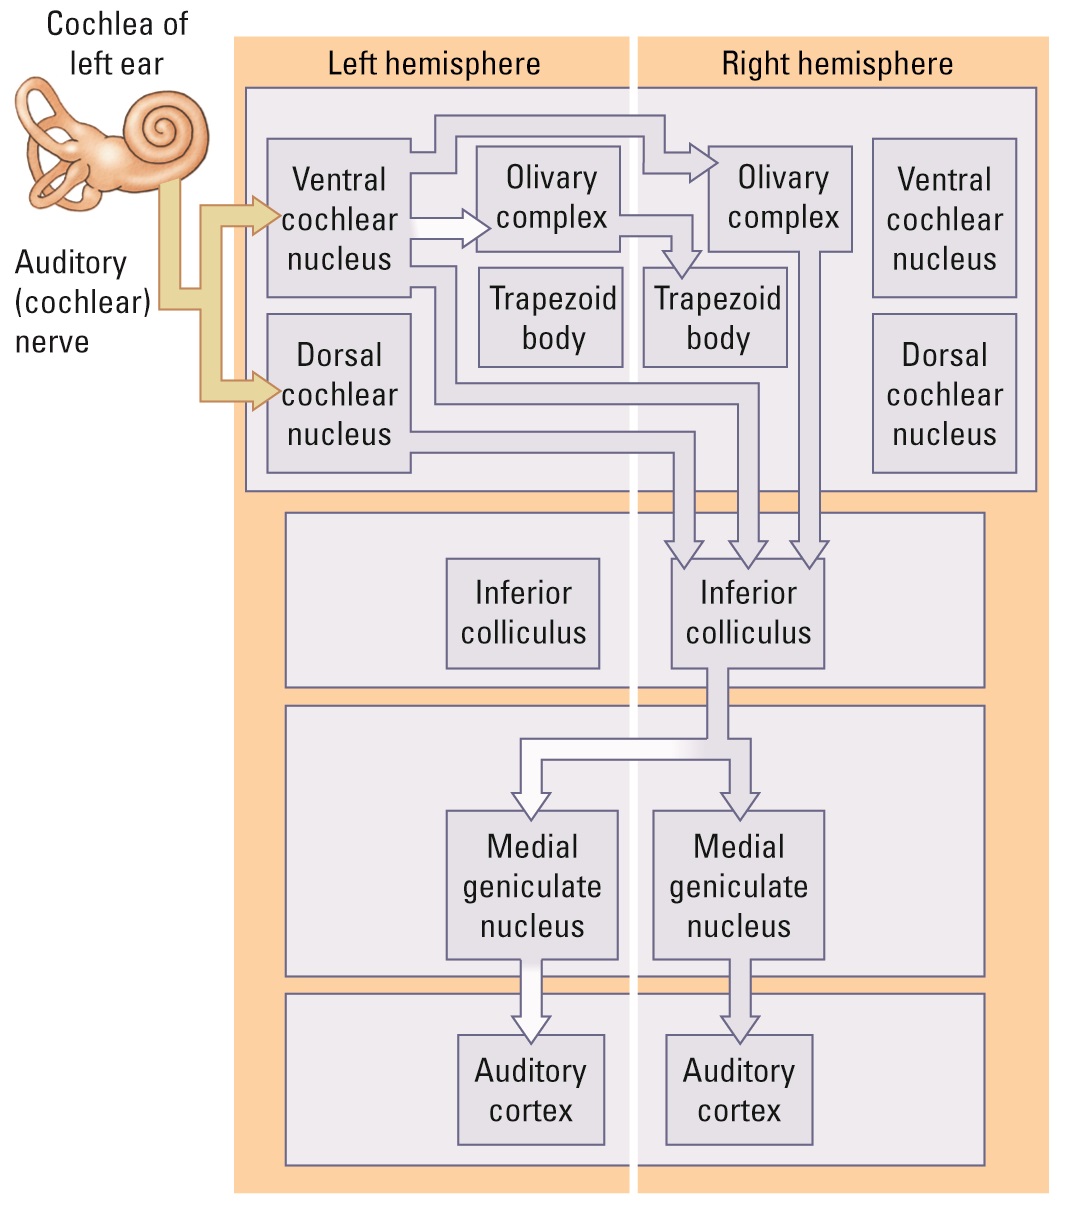 Scheme showing way of auditory information from the ear to the brain.